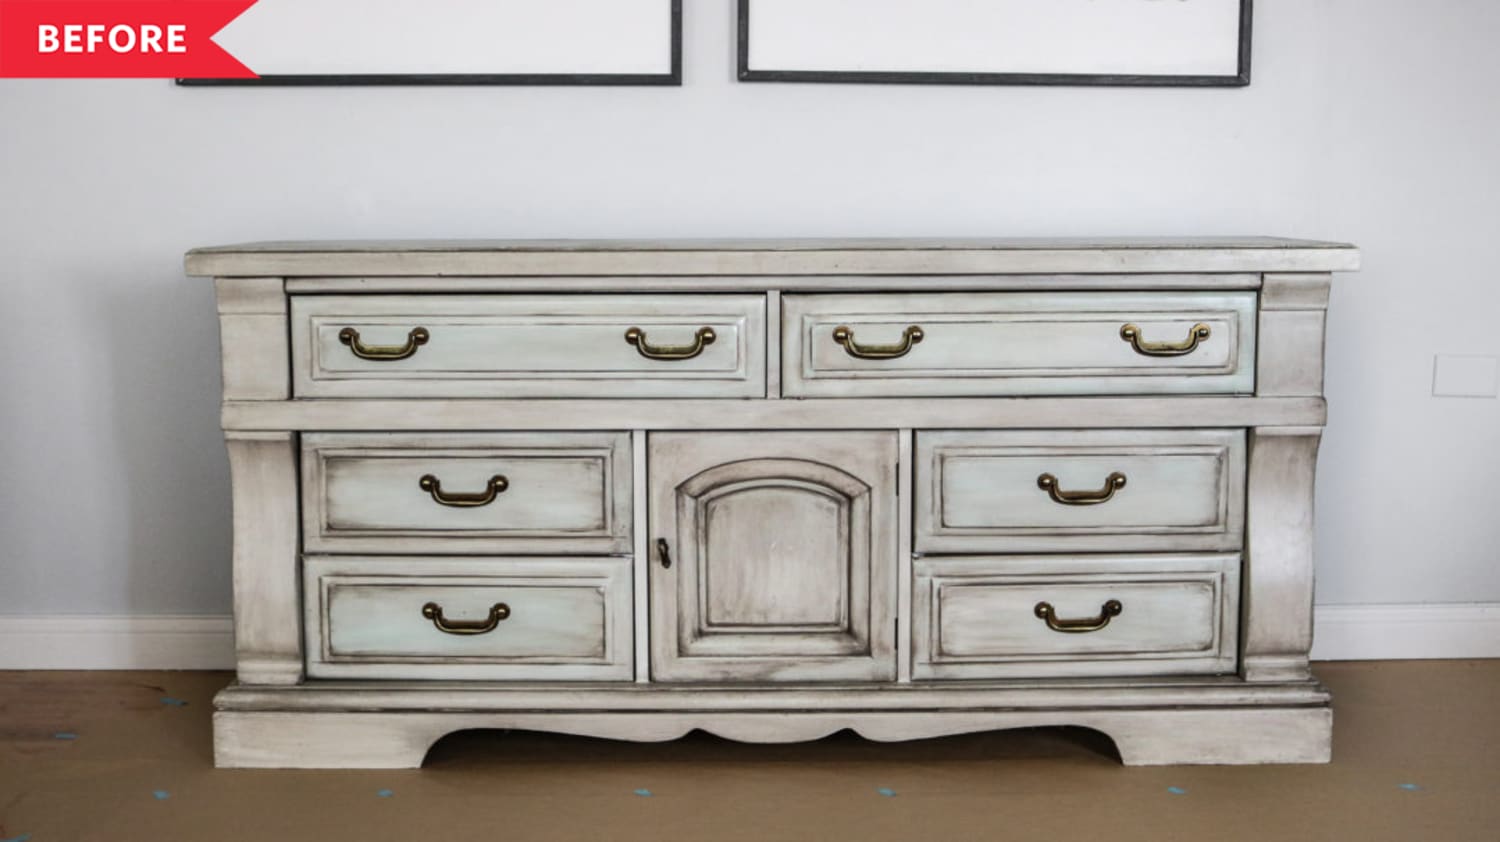 You’ll Think Twice About Passing Up Old Furniture After You See These Dresser Makeovers